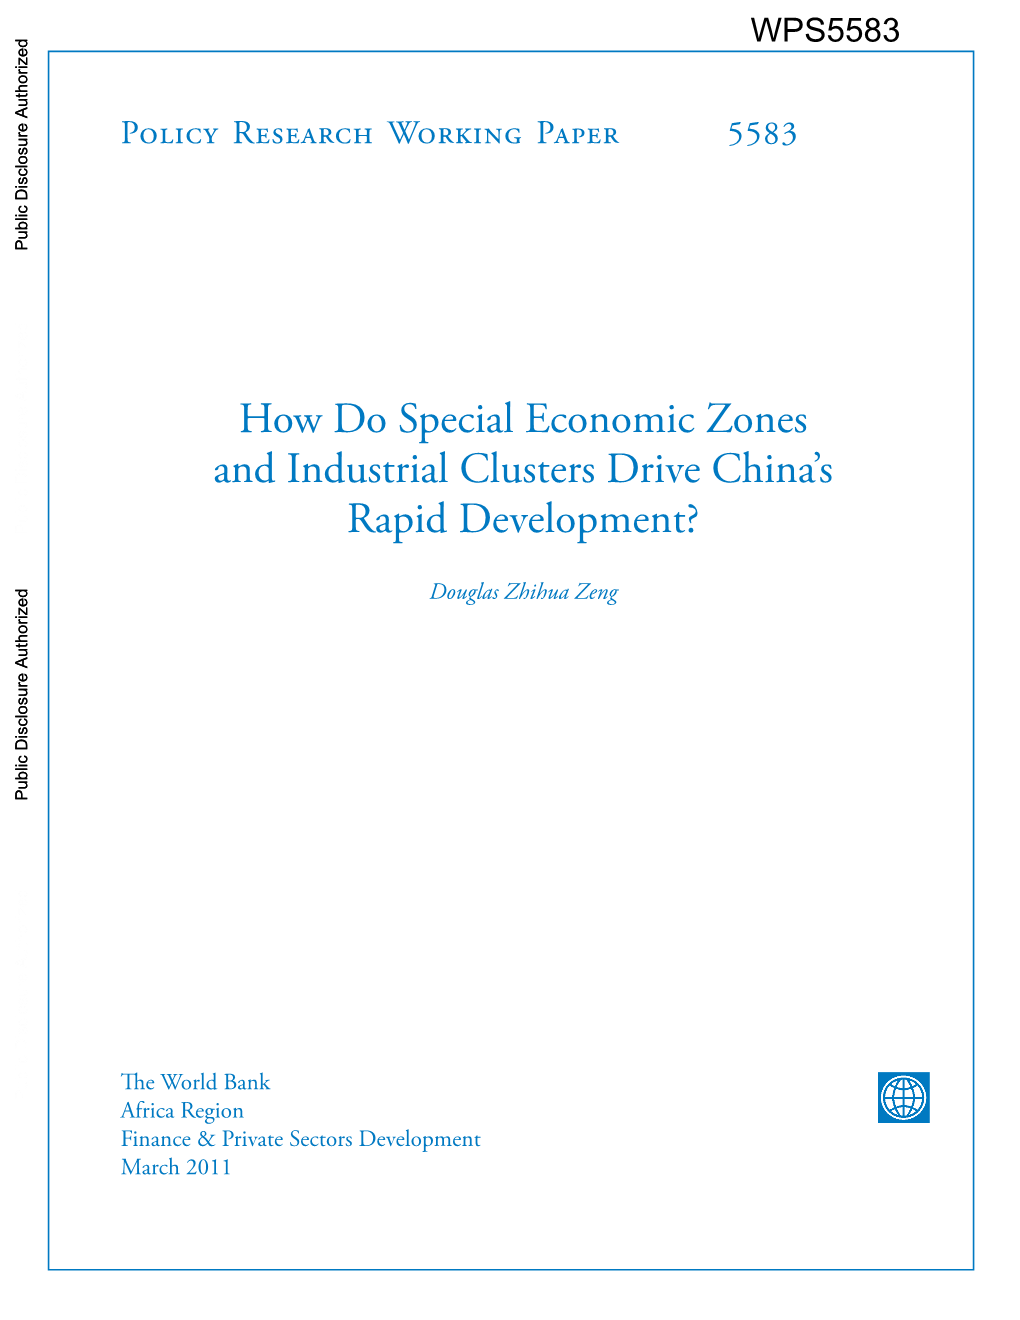 How Do Special Economic Zones and Industrial Clusters Drive China’S